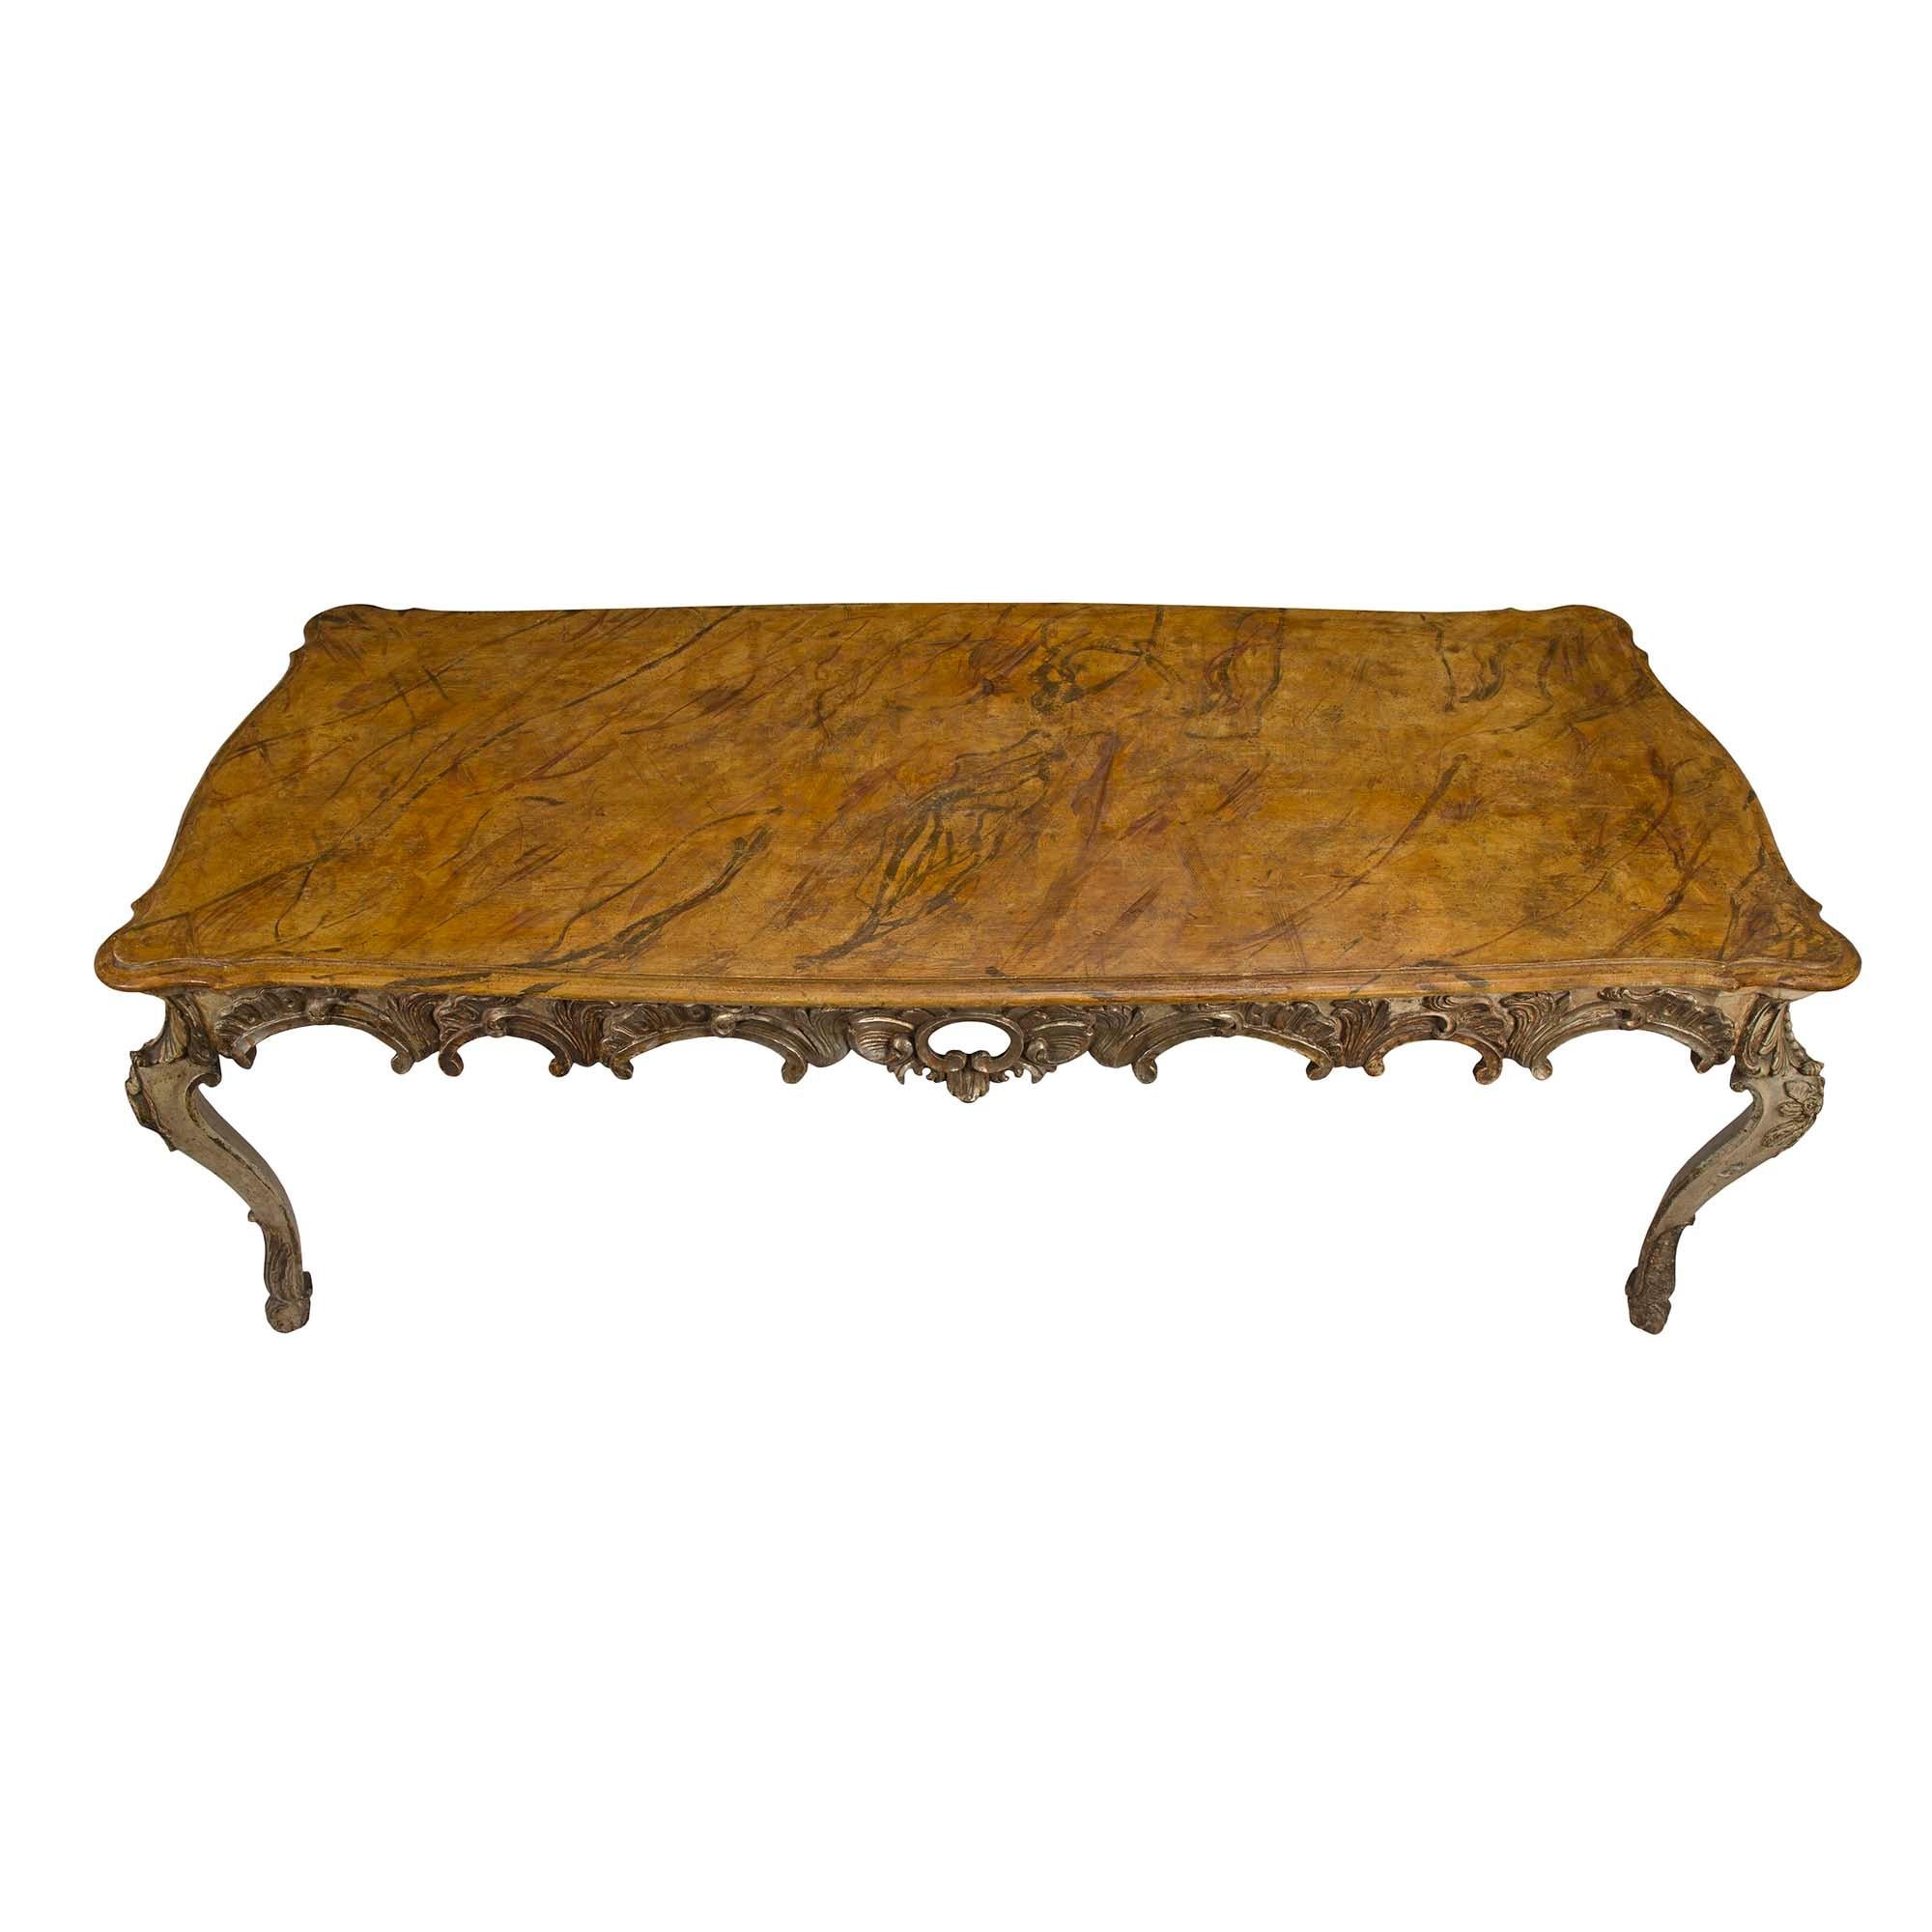 A wonderful Italian early 19th century Louis XV st. patinated and mecca dining table. The table is raised on cabriole legs decorated with acanthus leaves and large rosettes. The impressive frieze is centered at all side with a pierced seashell